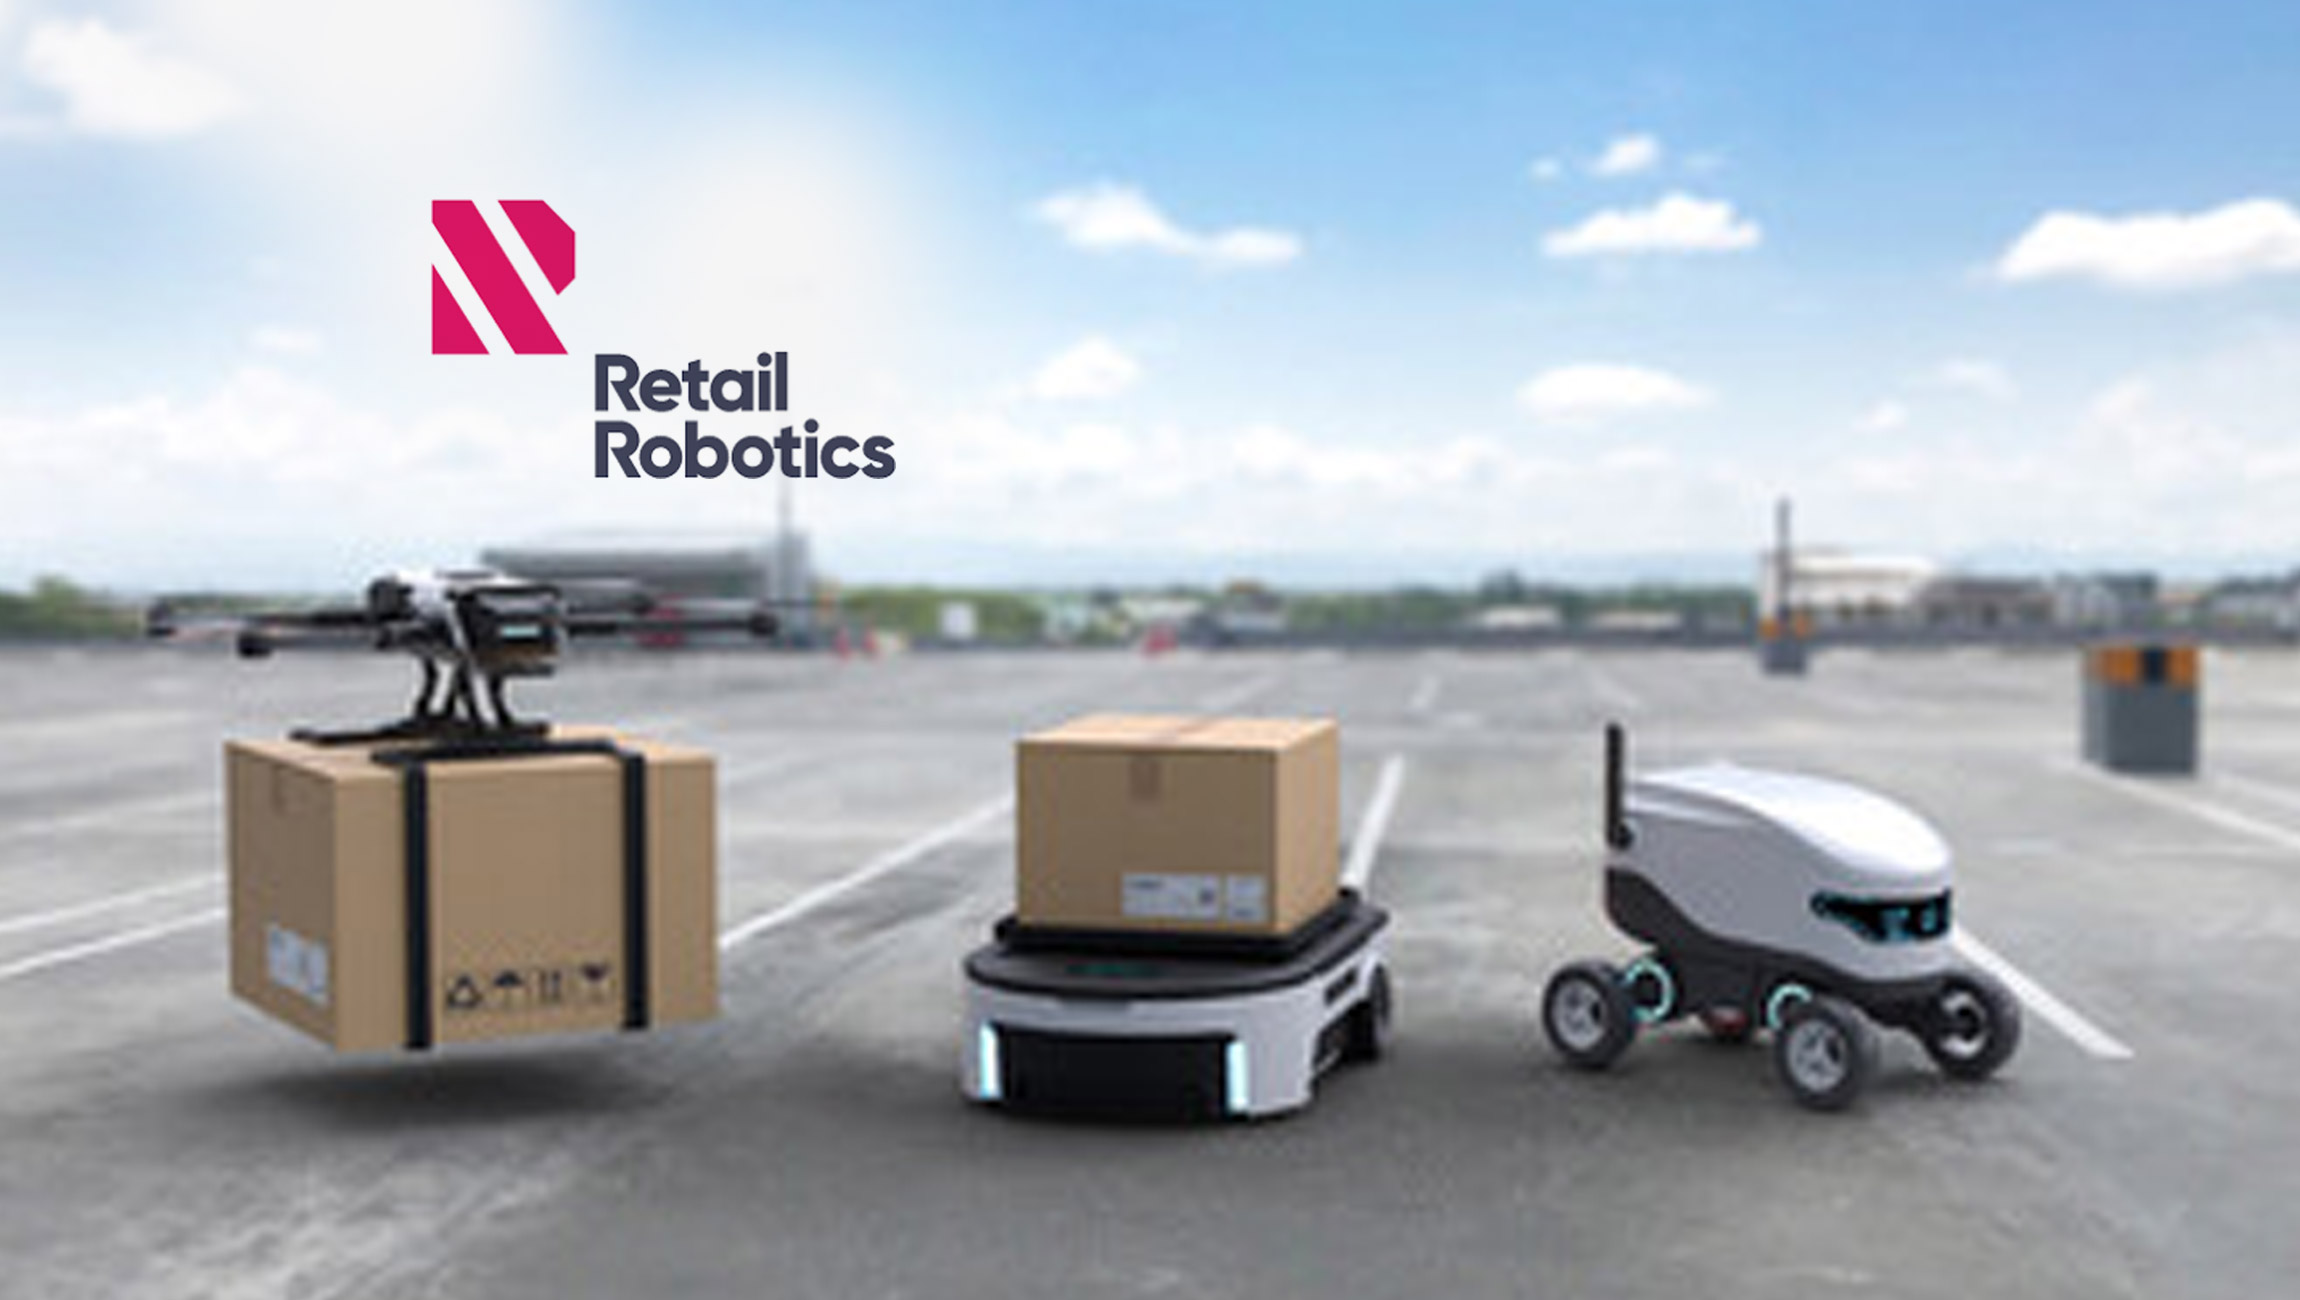 Retail-Robotics-Announces-Rapid-Expansion-with-New-Robotic-Delivery-Solutions